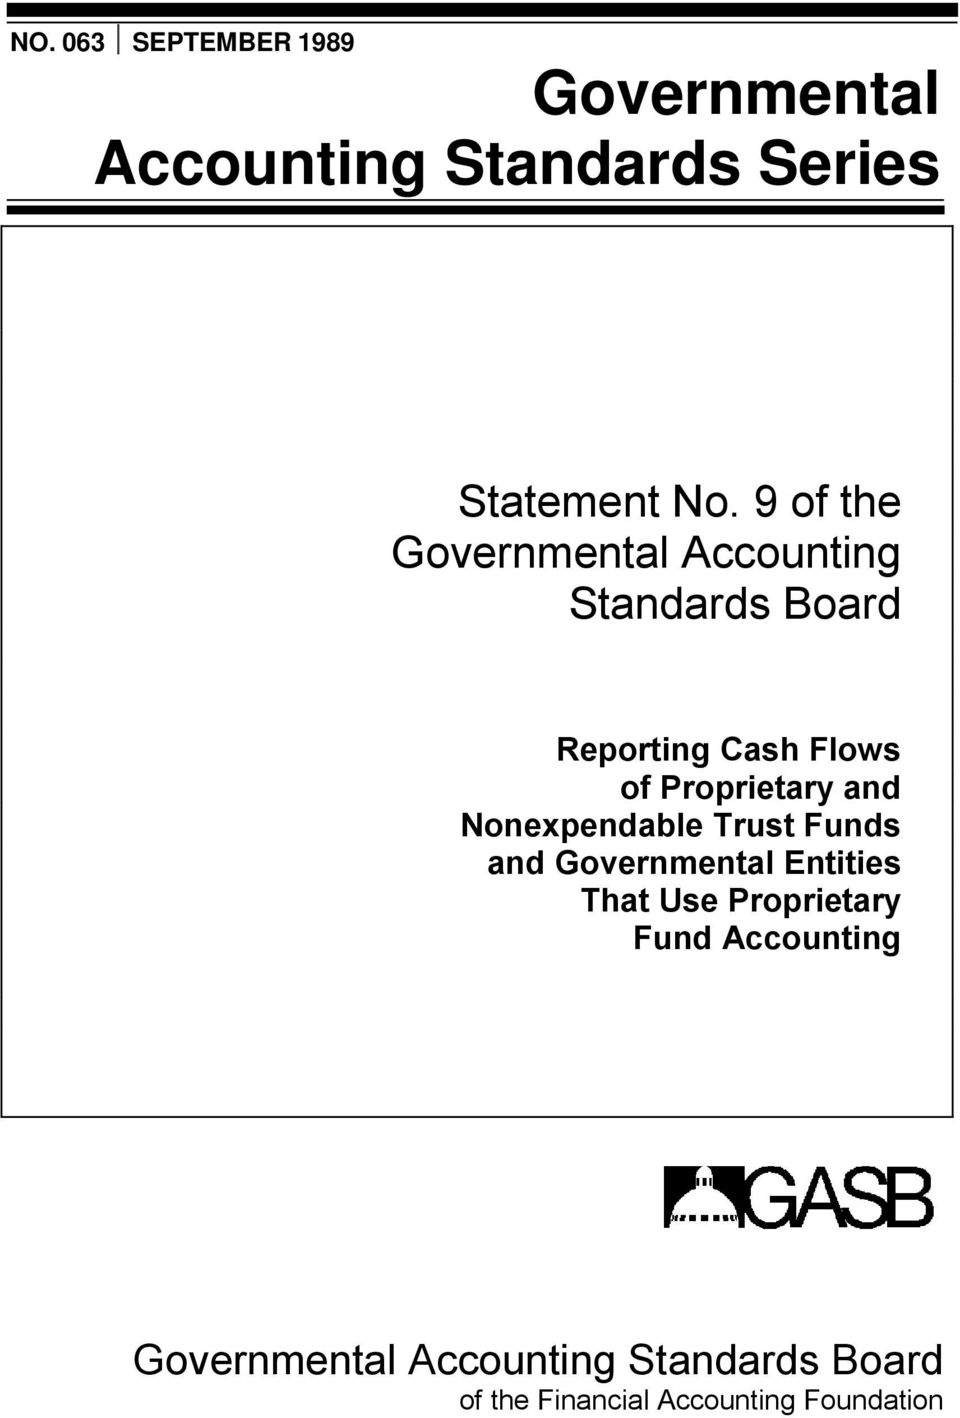 Proprietary and Nonexpendable Trust Funds and Governmental Entities That Use